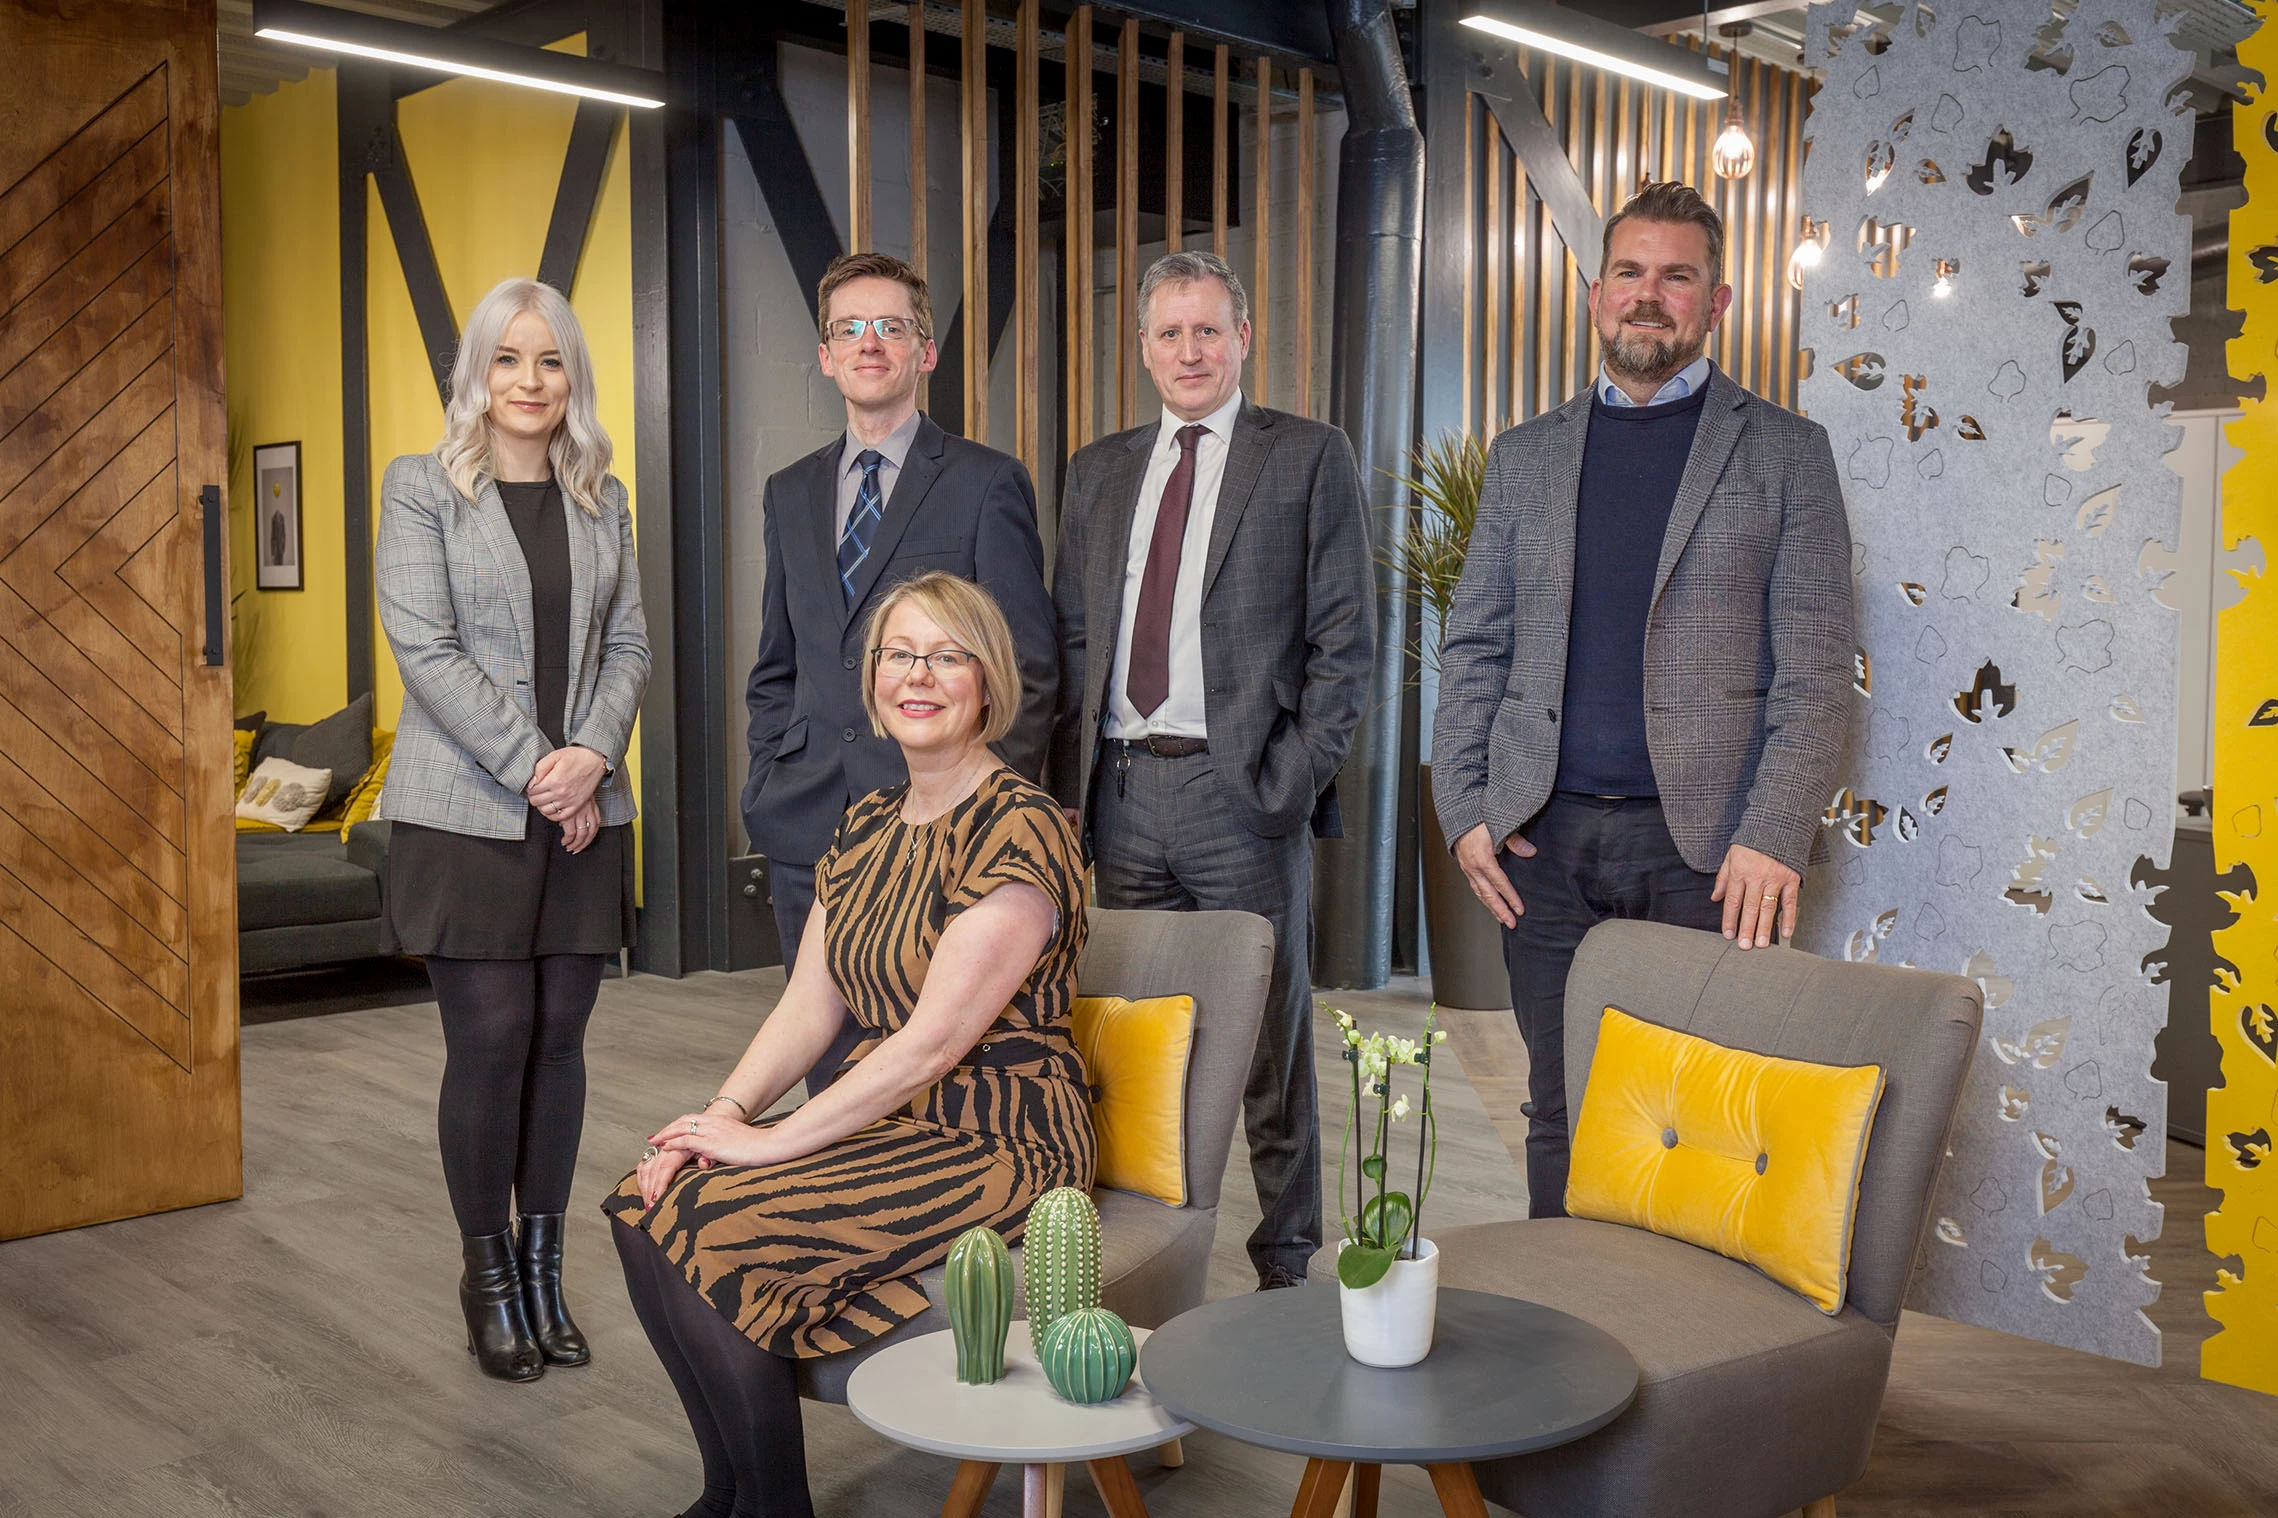 (Left to right): Sophie Kendall of OVO, Taylor&Emmet's Richard Whiteley and Steve Hinshelwood and Ian Appleyard and Heather Slater (sitting) of haus admire the firm's new premises. 